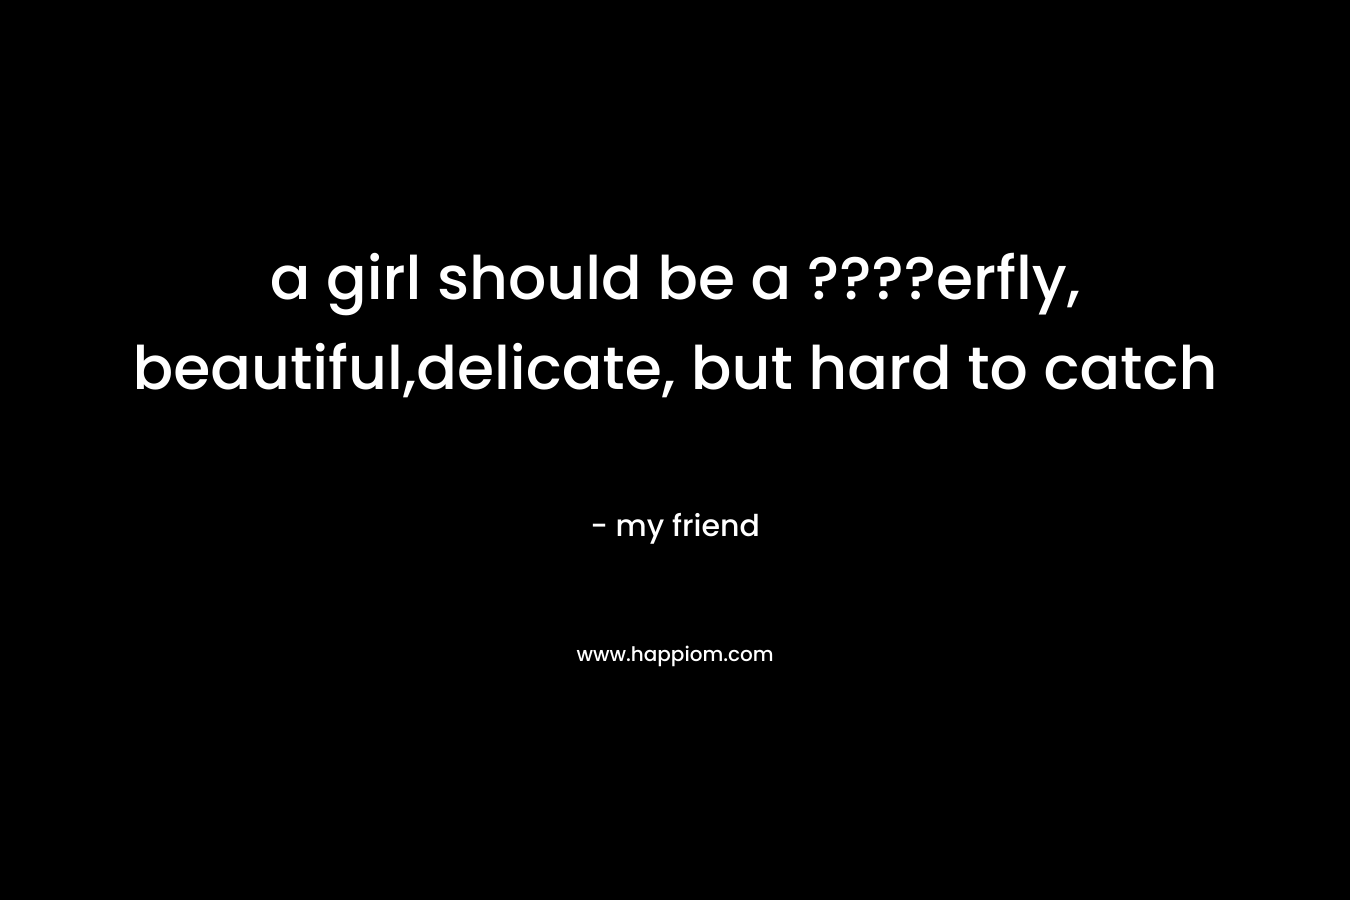 a girl should be a ????erfly, beautiful,delicate, but hard to catch